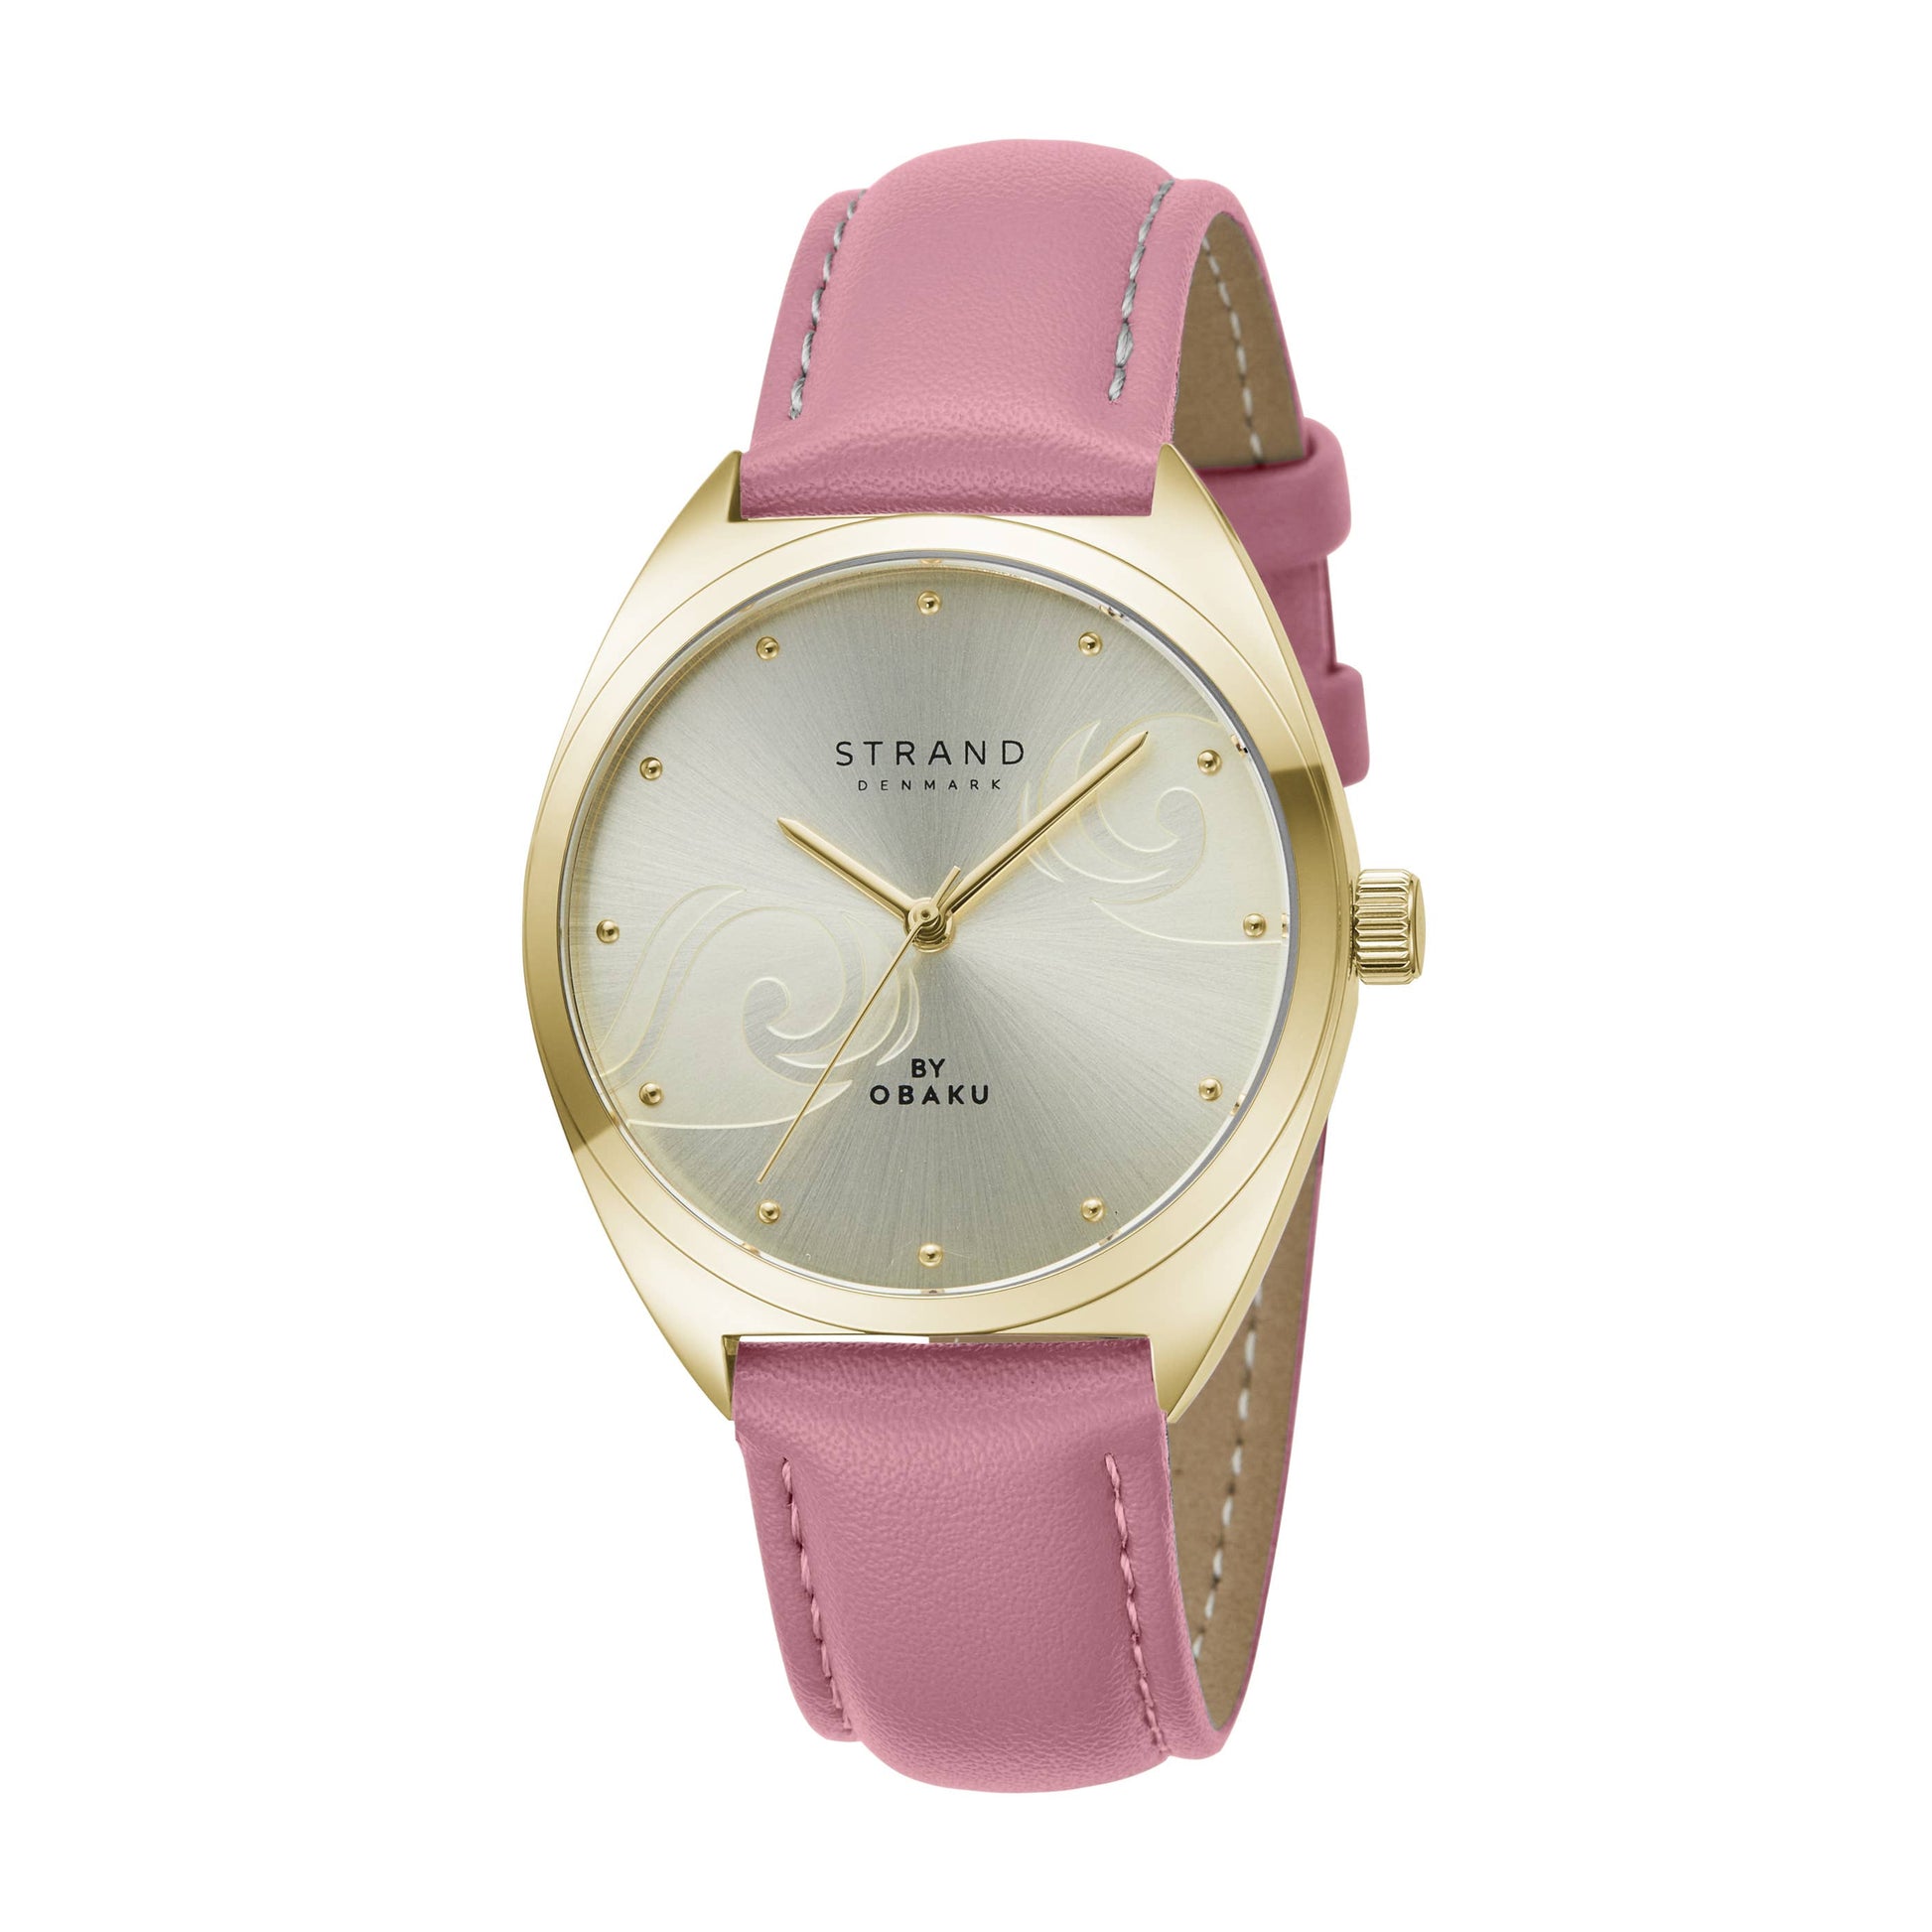 Gold ocean waves sunray pattern dial watch with Pink strap - MinutesHoursDays